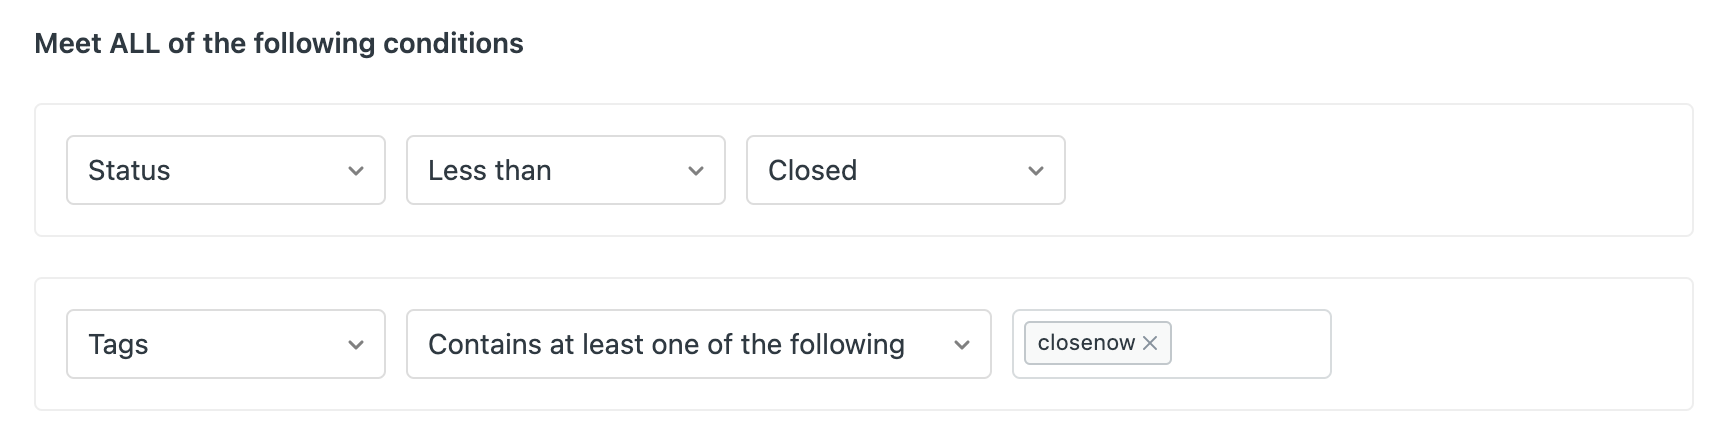 status is less than closed and tags contain closenow